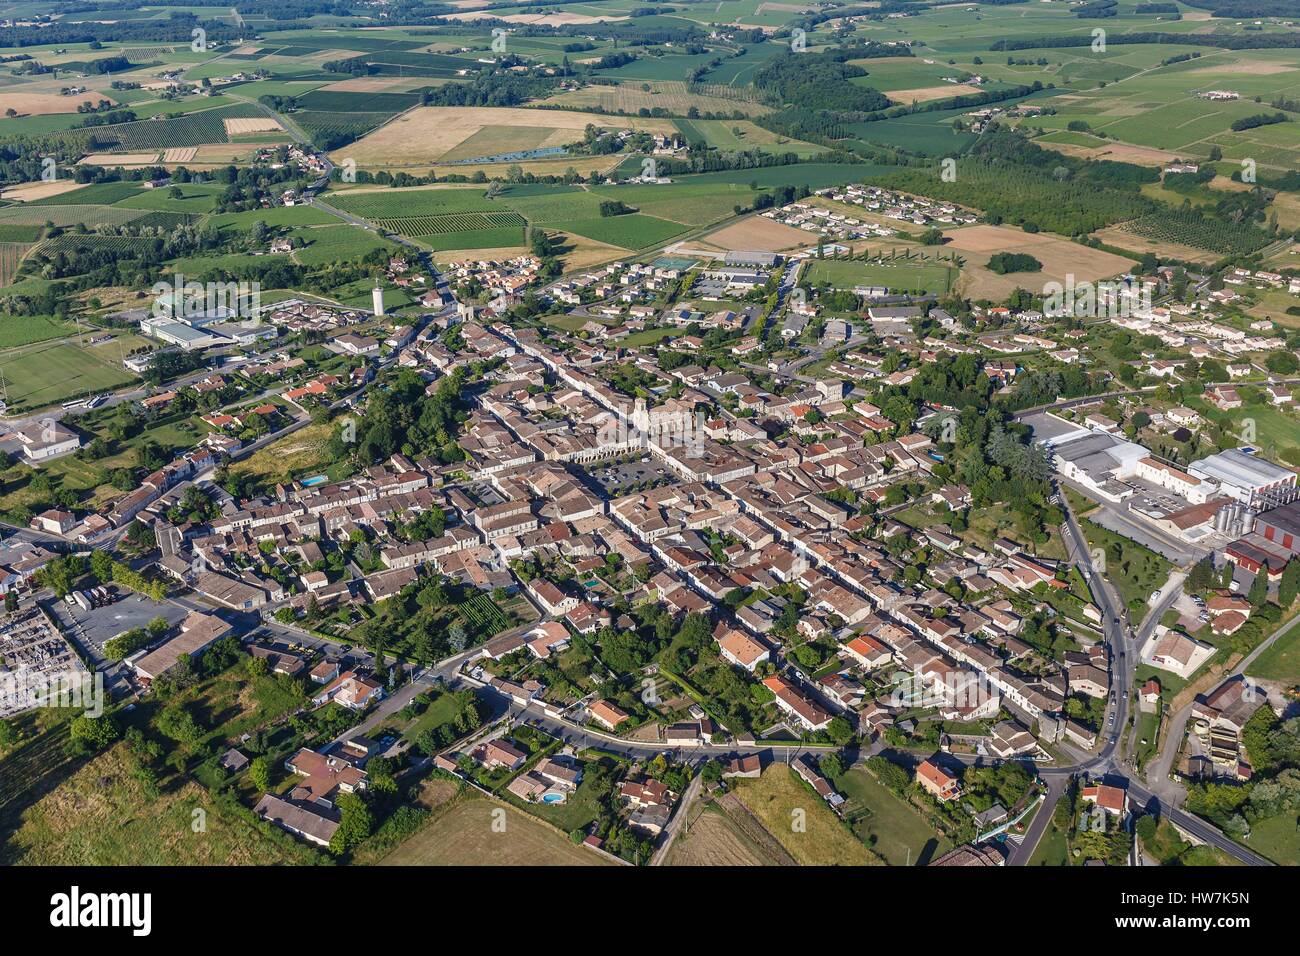 France, Gironde, Sauveterre de Guyenne, bastide surrounded by Entre deux Mers vineyards (aerial view) Stock Photo